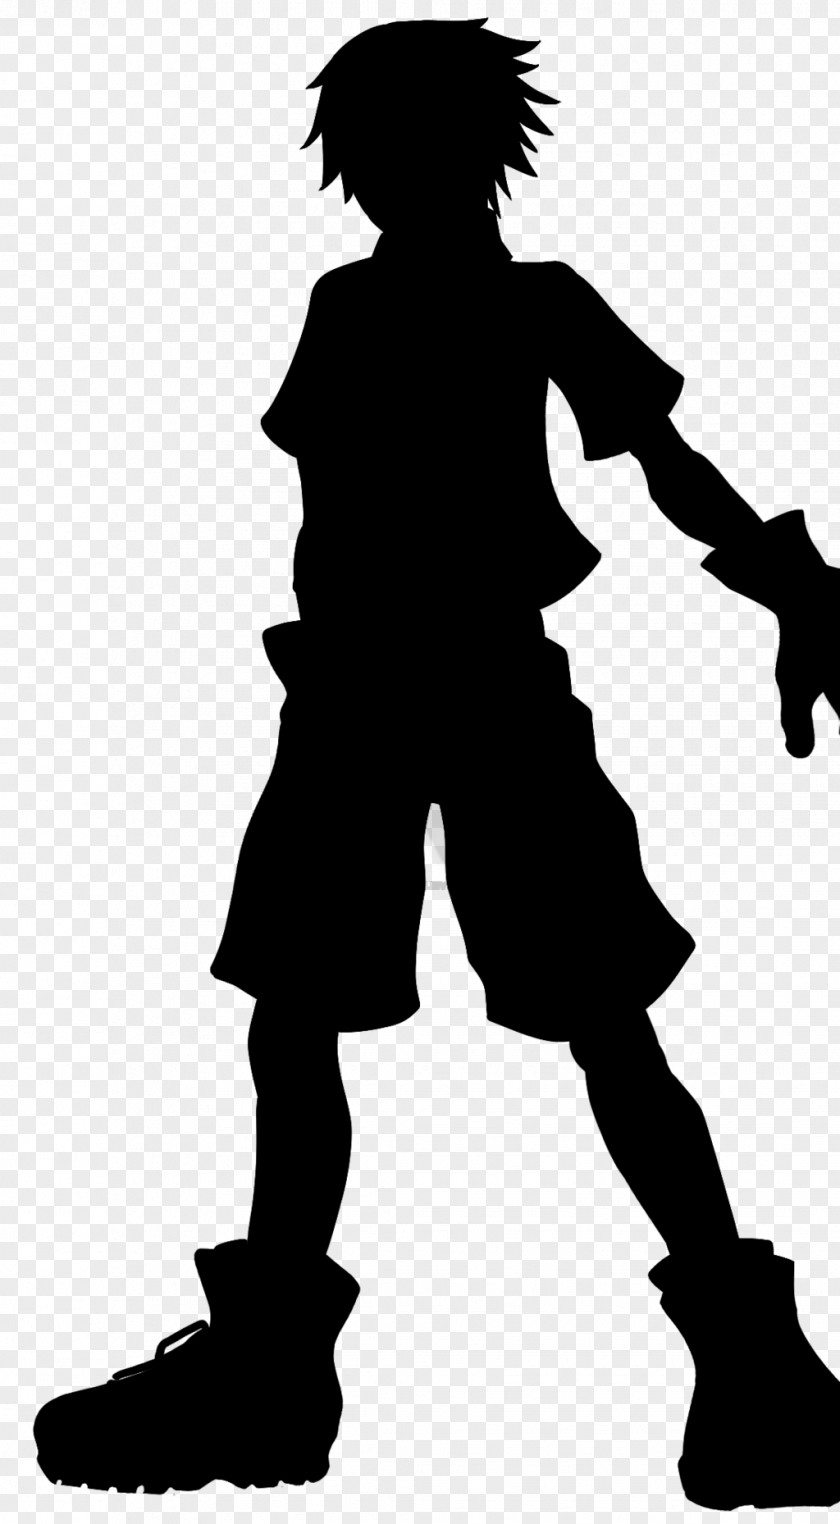 Super Smash Bros. Ultimate Silhouette Shadow Game Image PNG